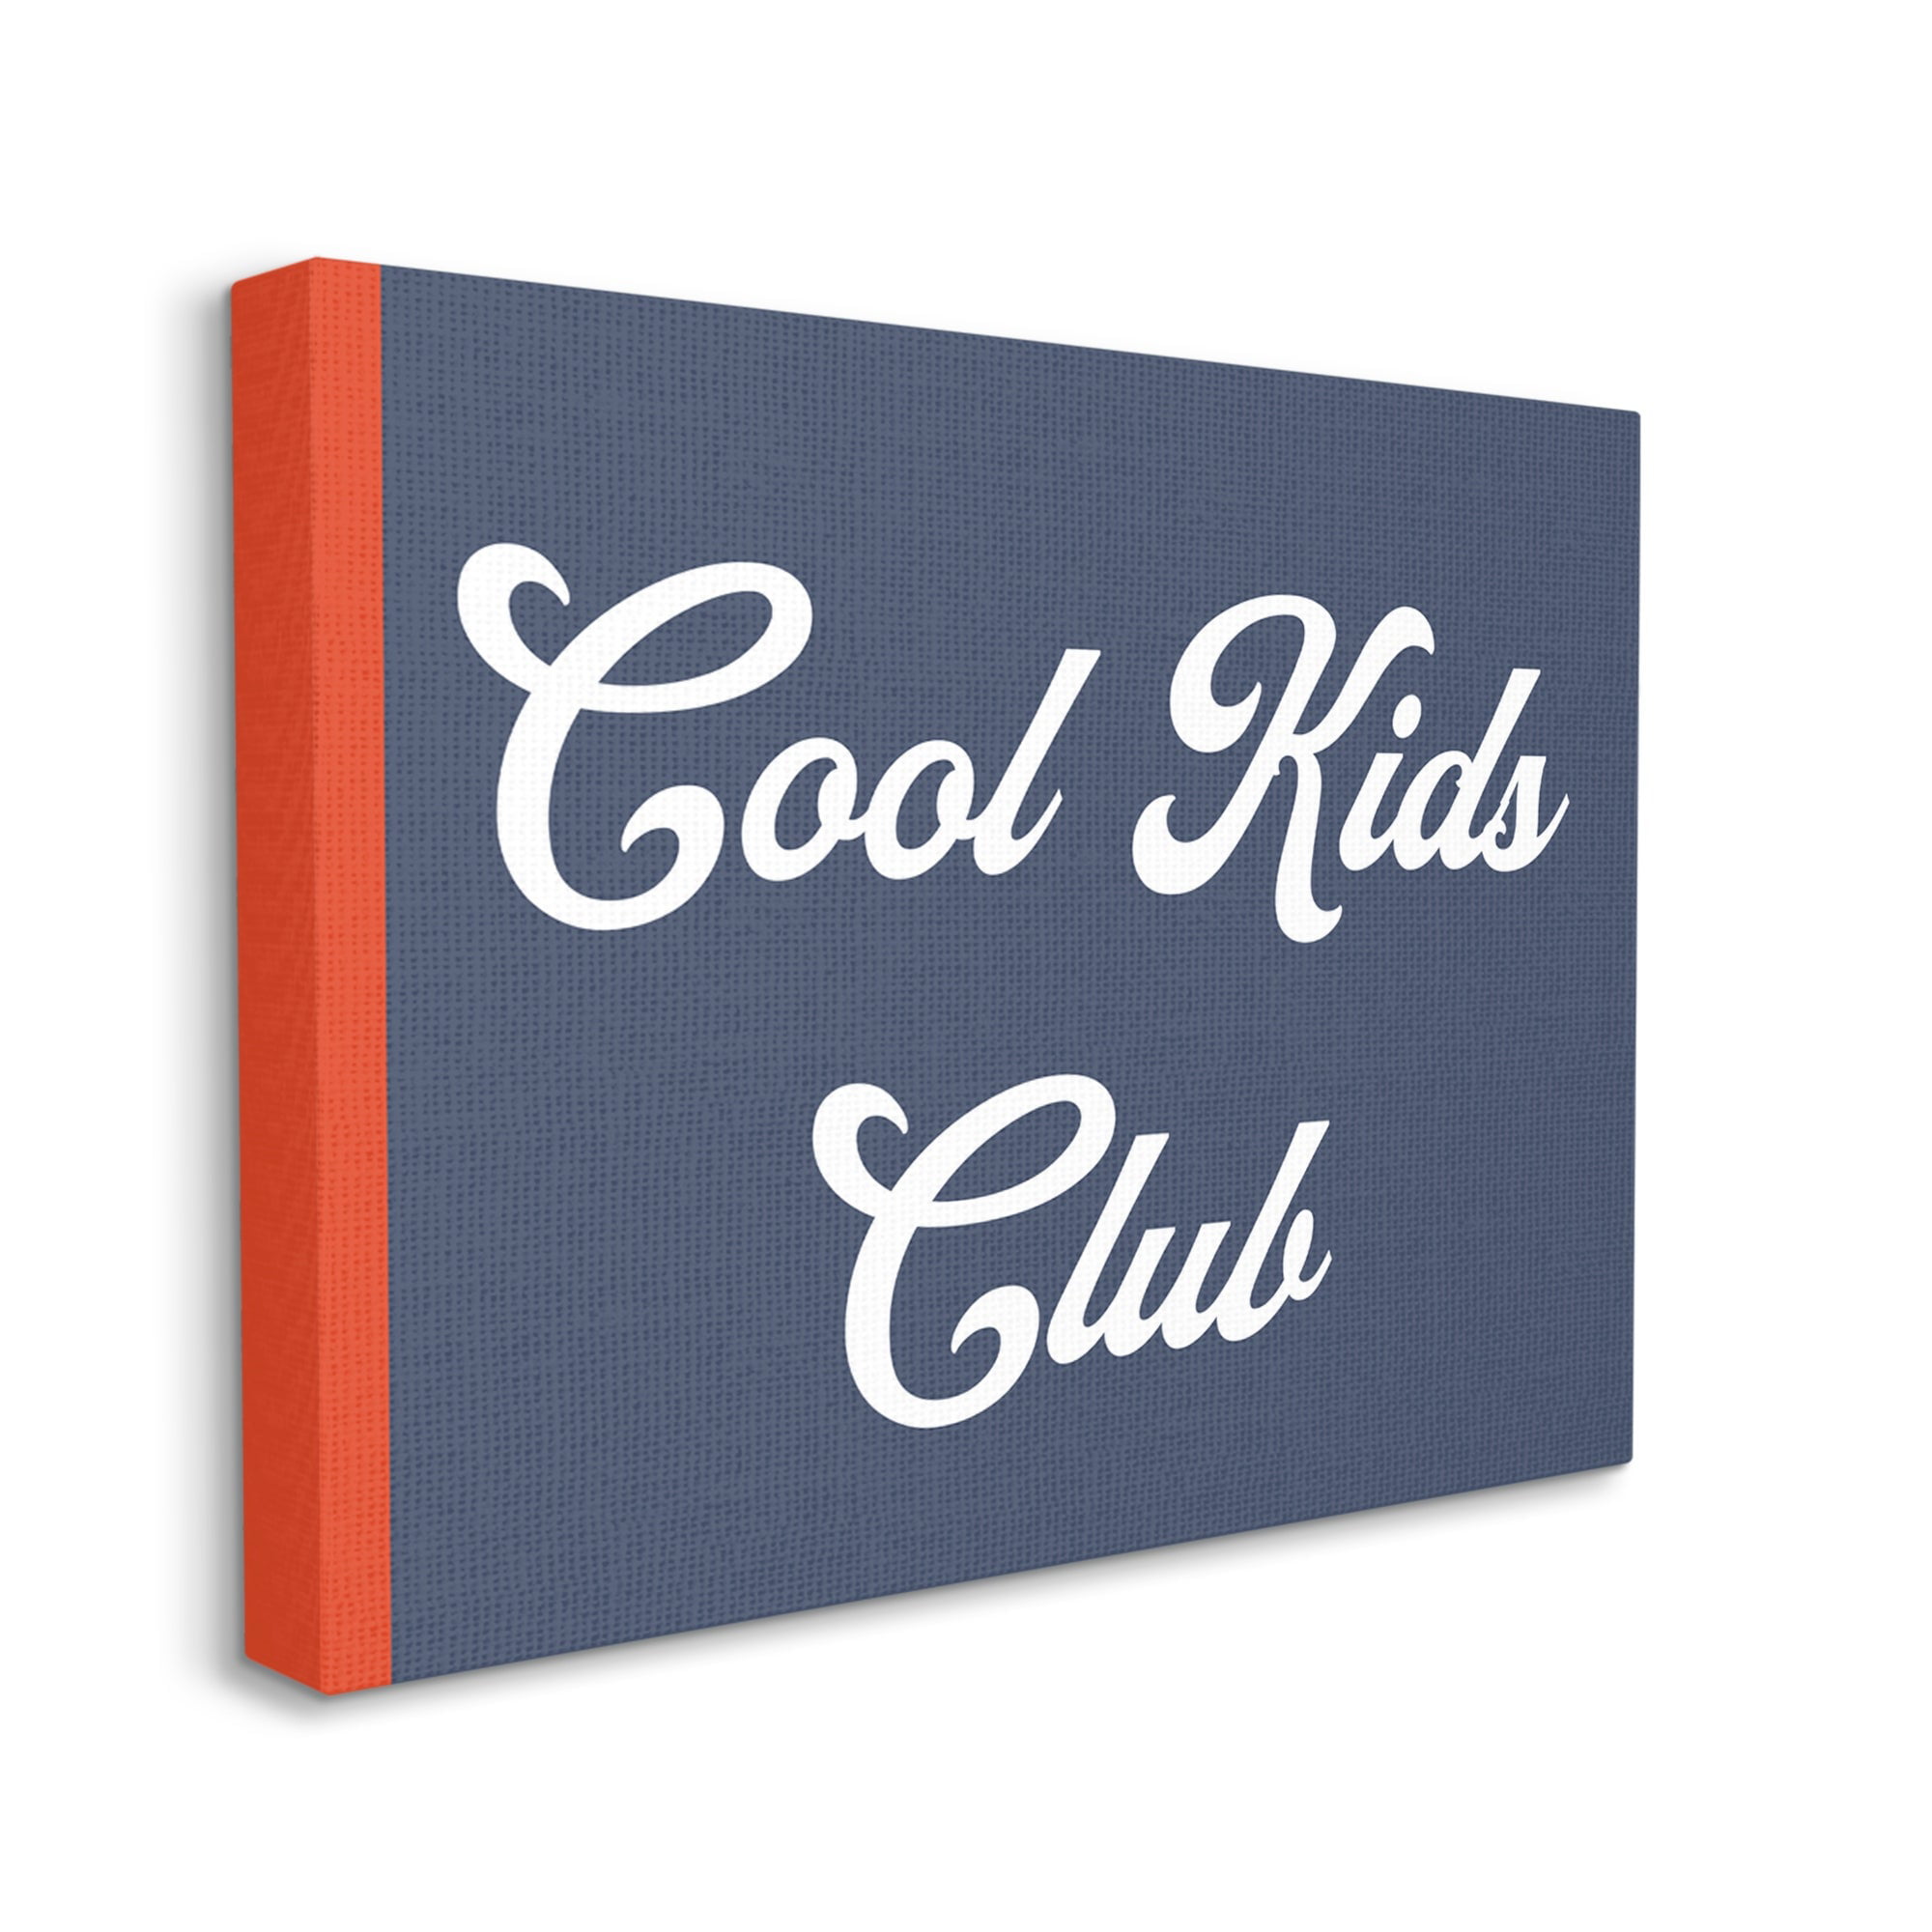 Stupell Industries Cool Kids Club Children's Sign Bold Red Blue, 48 x  36,Design by Daphne Polselli 